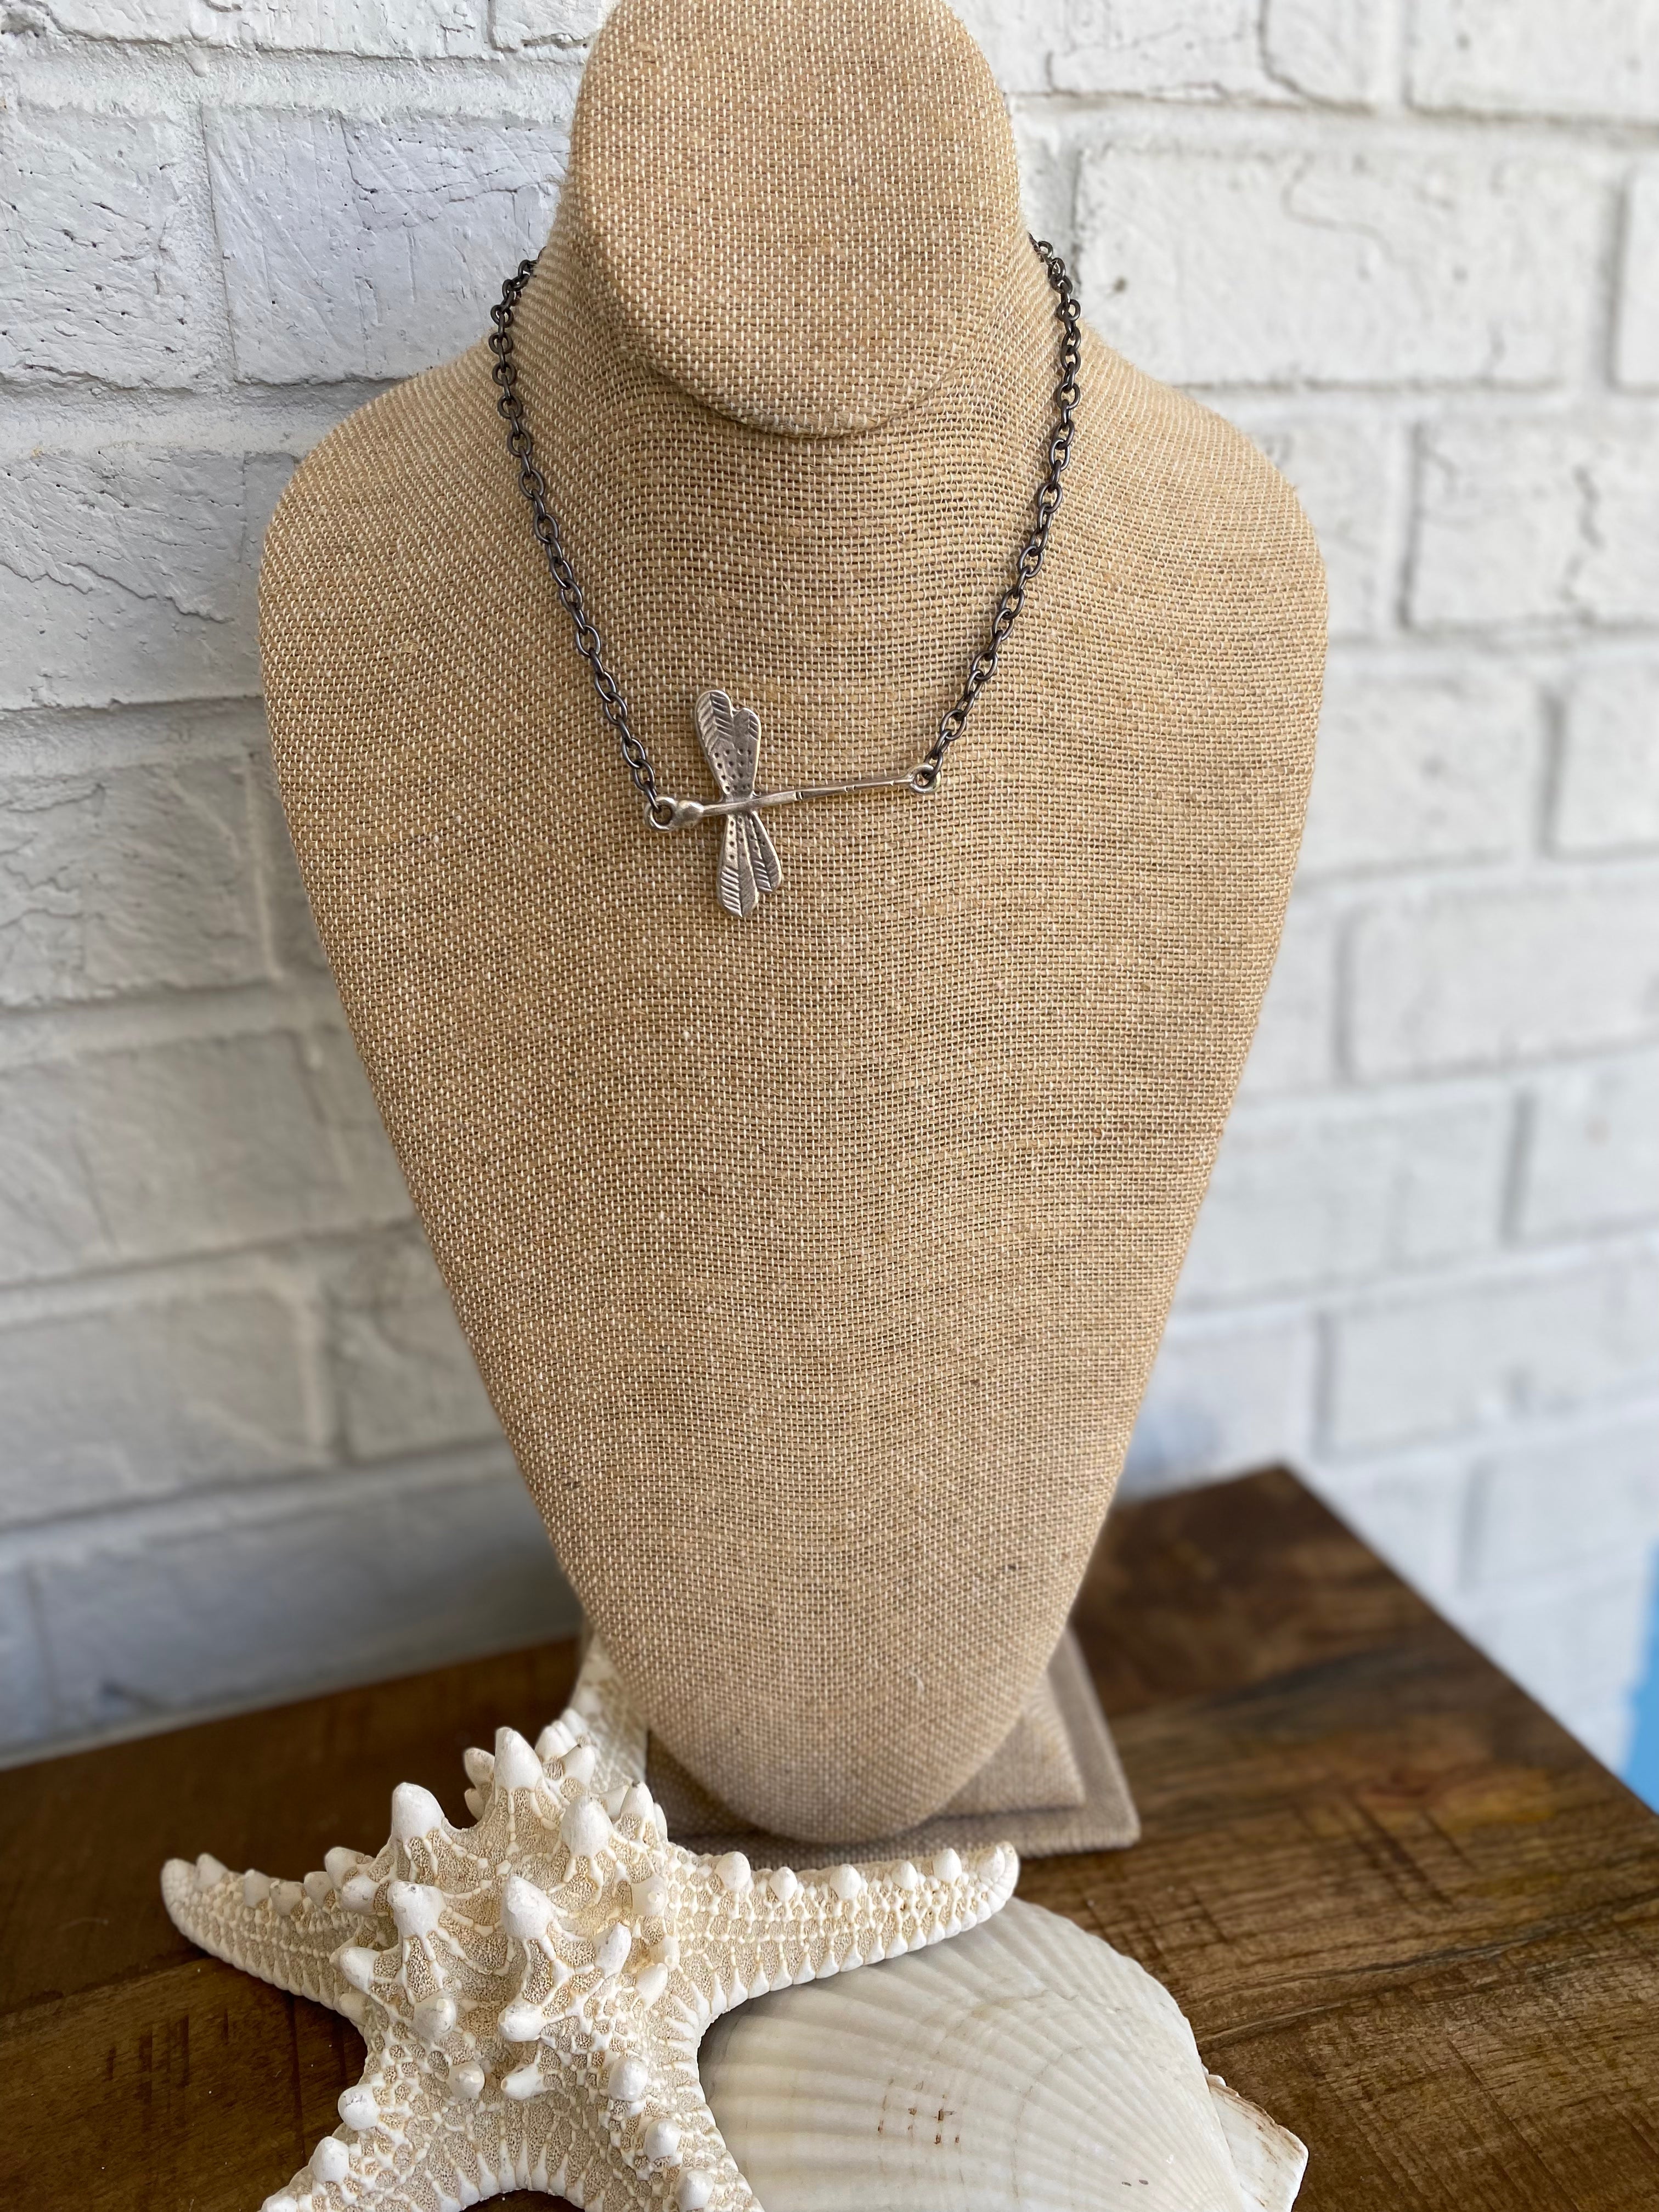 “ Dragonfly On Me” Necklace